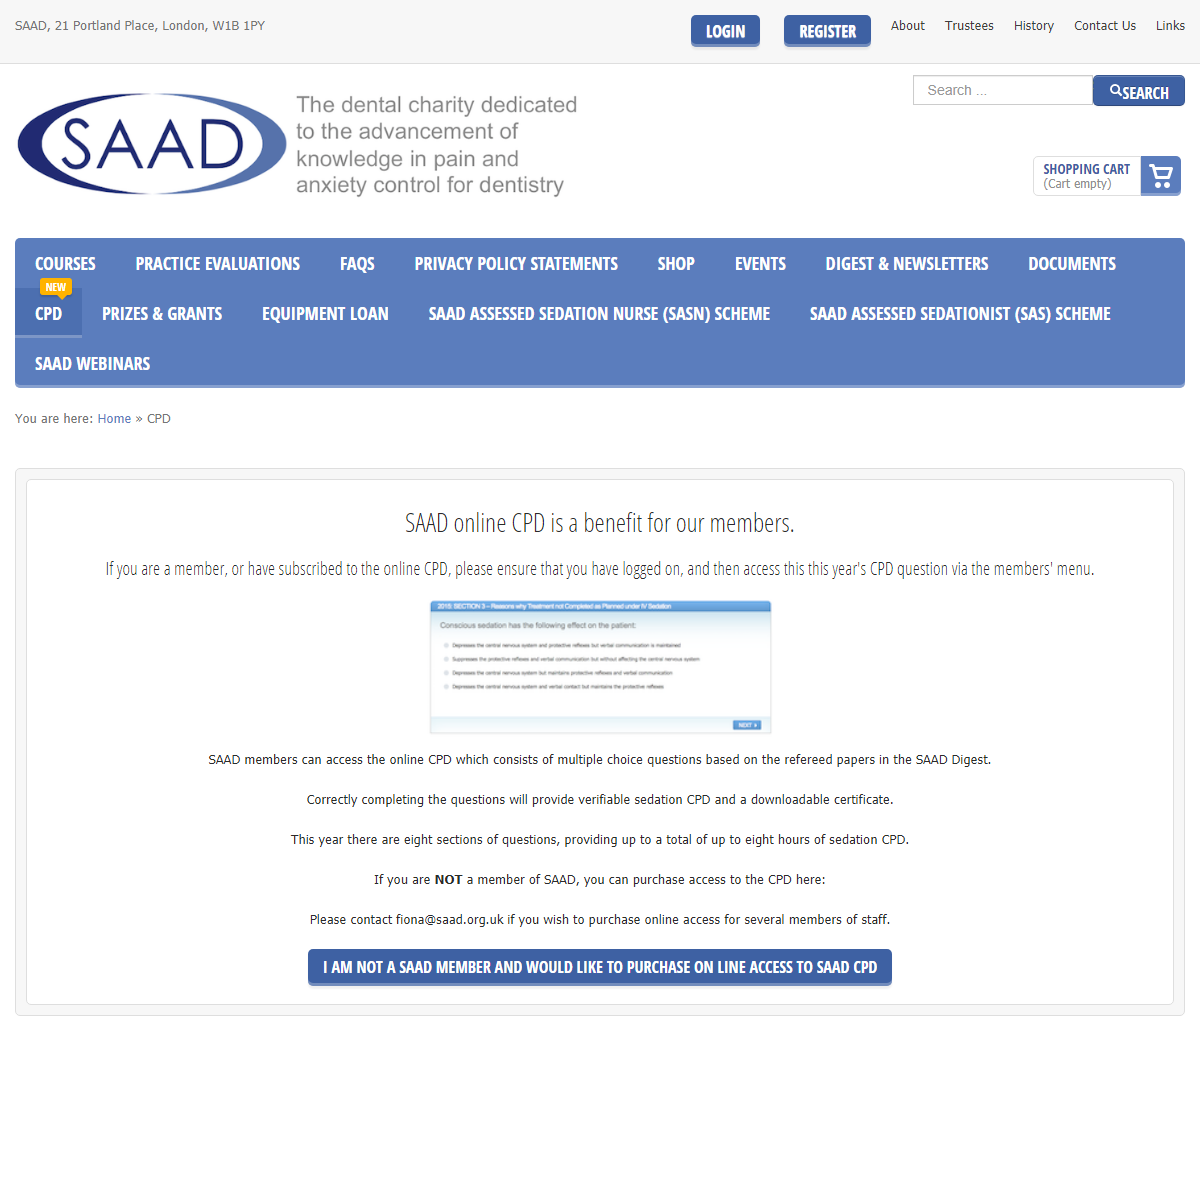 A complete backup of https://www.saad.org.uk/index.php/cpd-not-subscribed